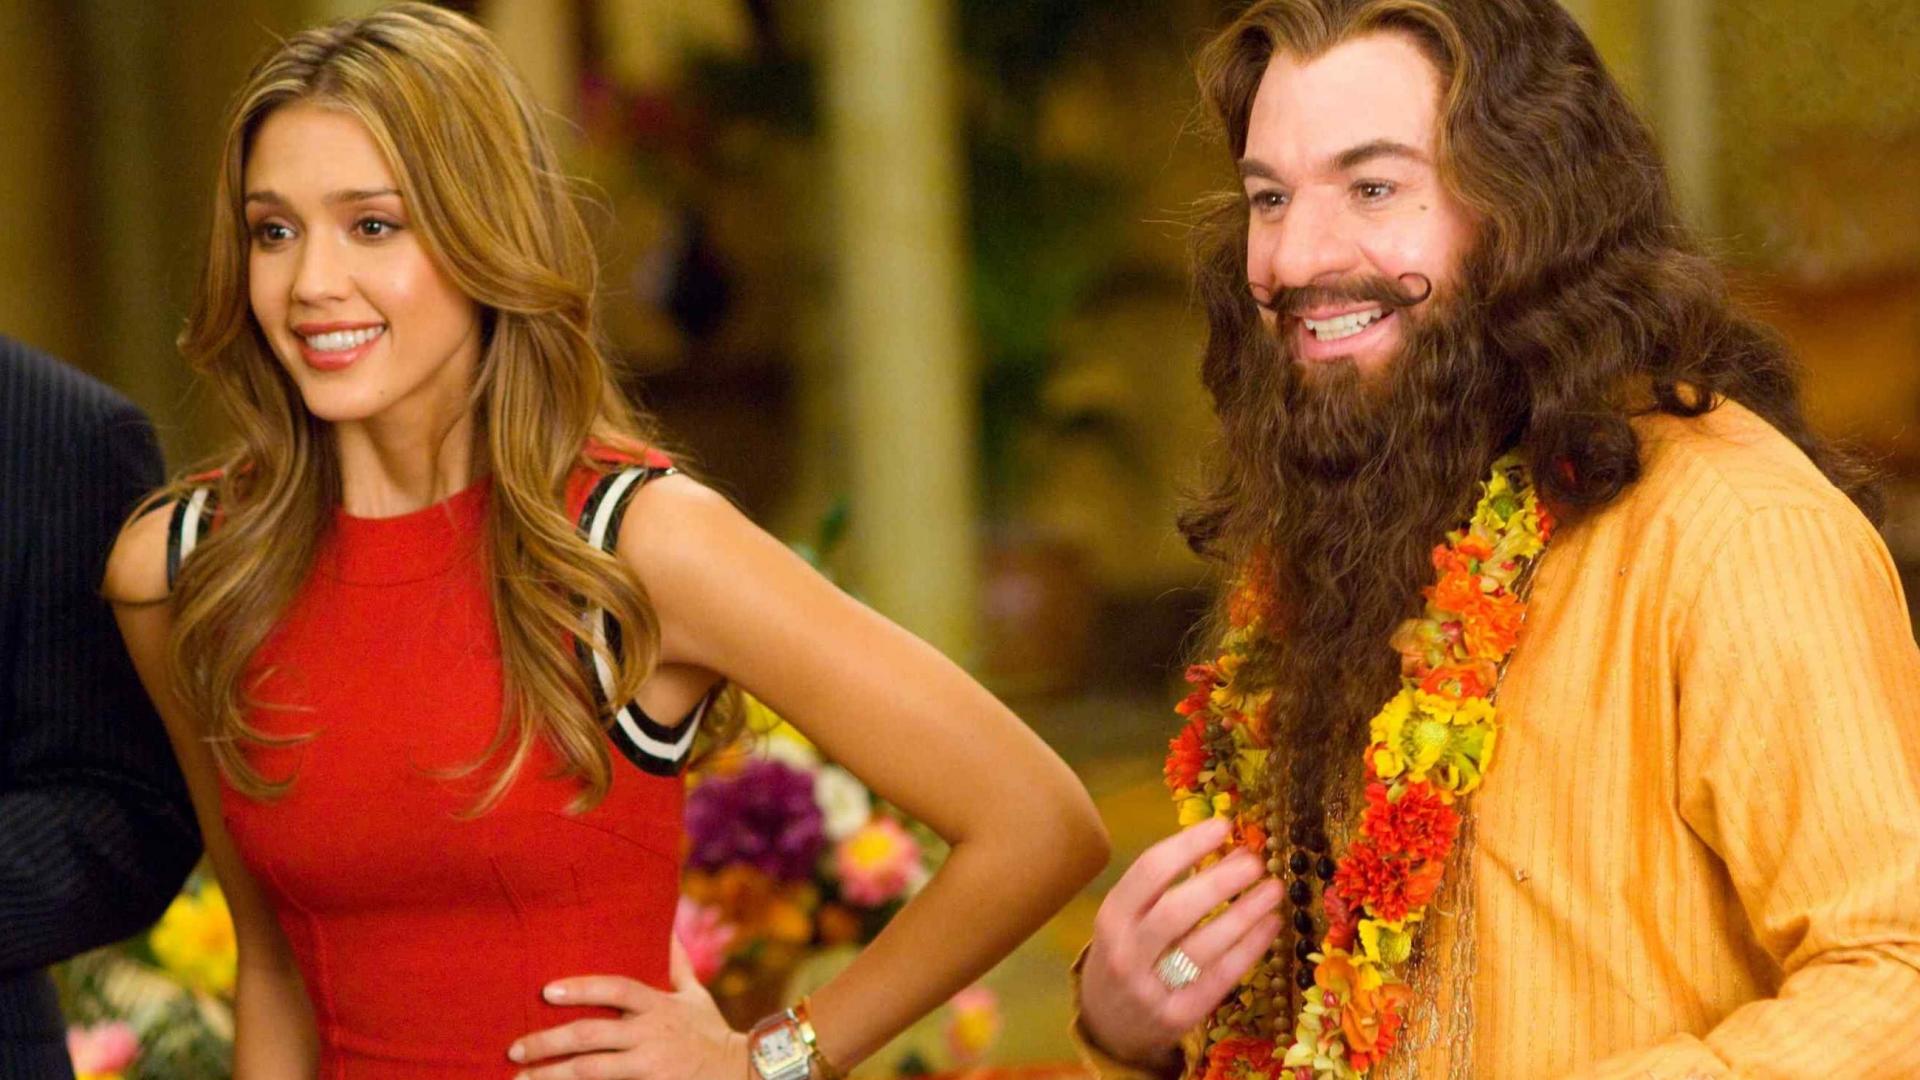 The Love Guru (2008) | FilmFed - Movies, Ratings, Reviews, and Trailers